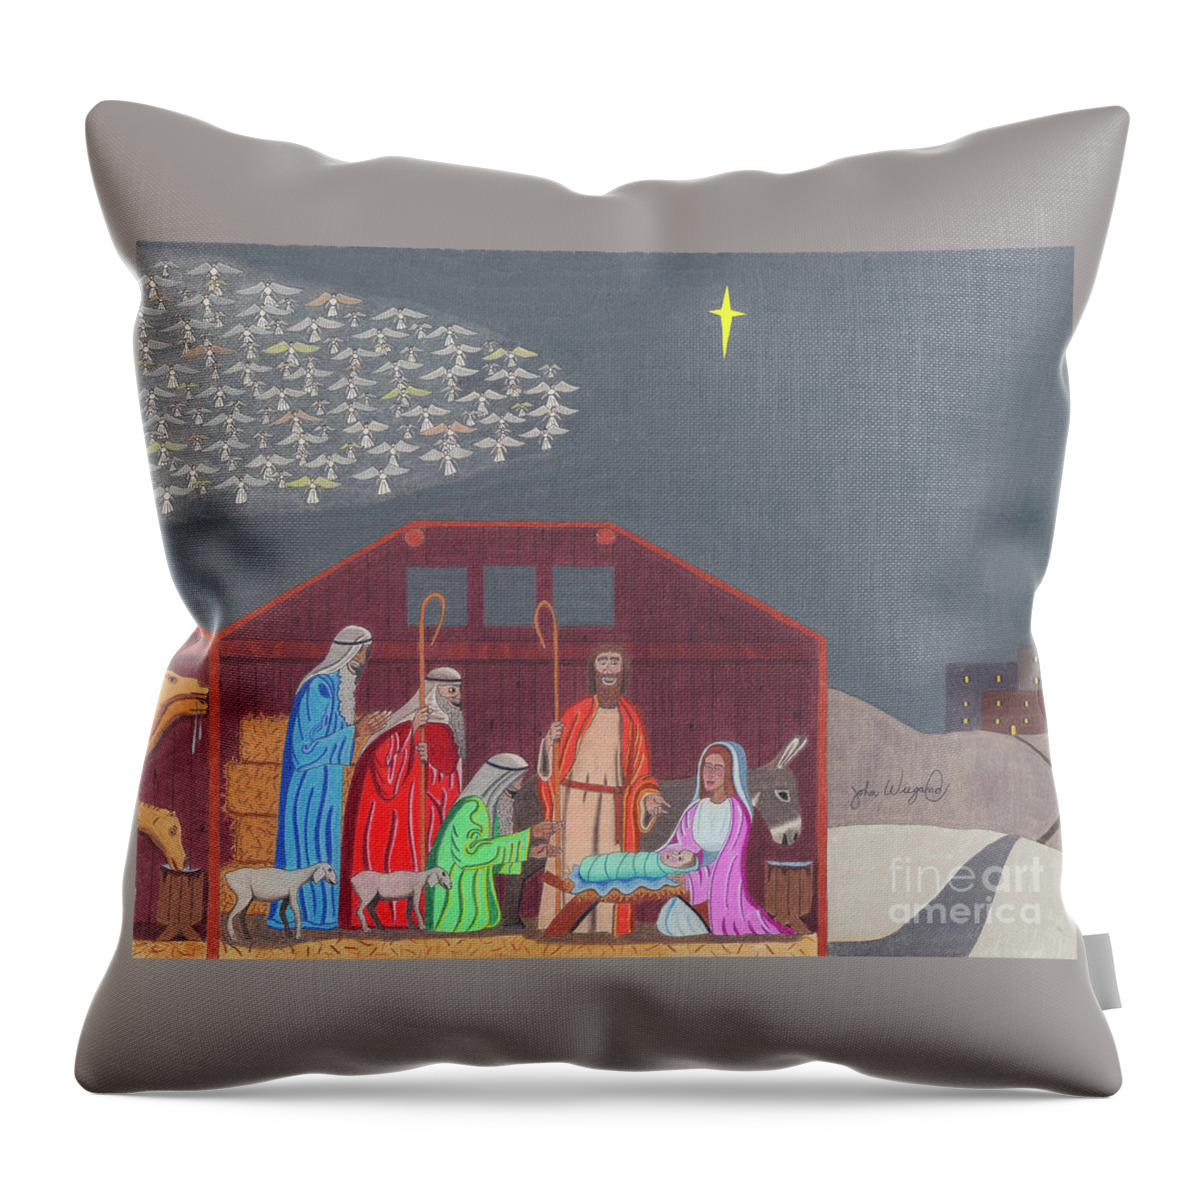 North Star Throw Pillow featuring the drawing A Star Is Born by John Wiegand